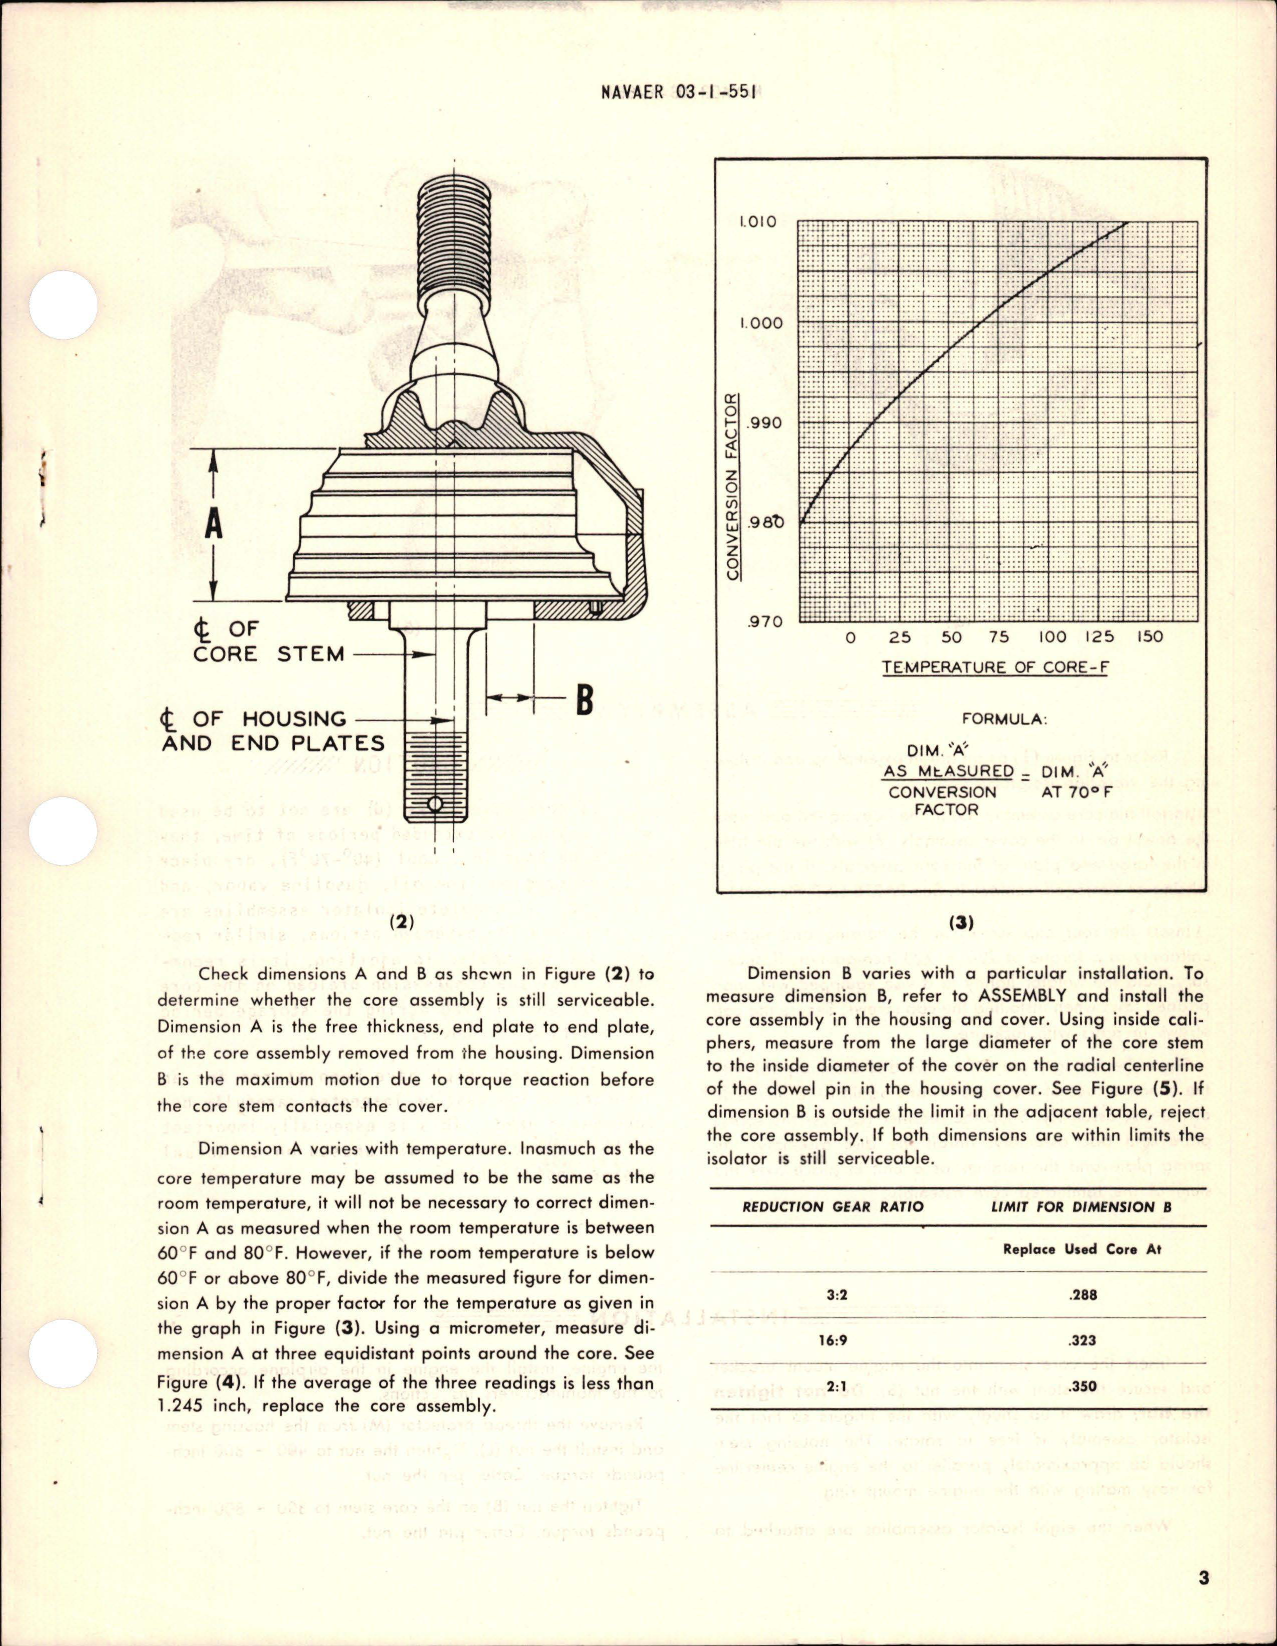 Sample page 5 from AirCorps Library document: Instructions with Parts List for Engine Vibration Isolators - MB-42399 and MB-81947